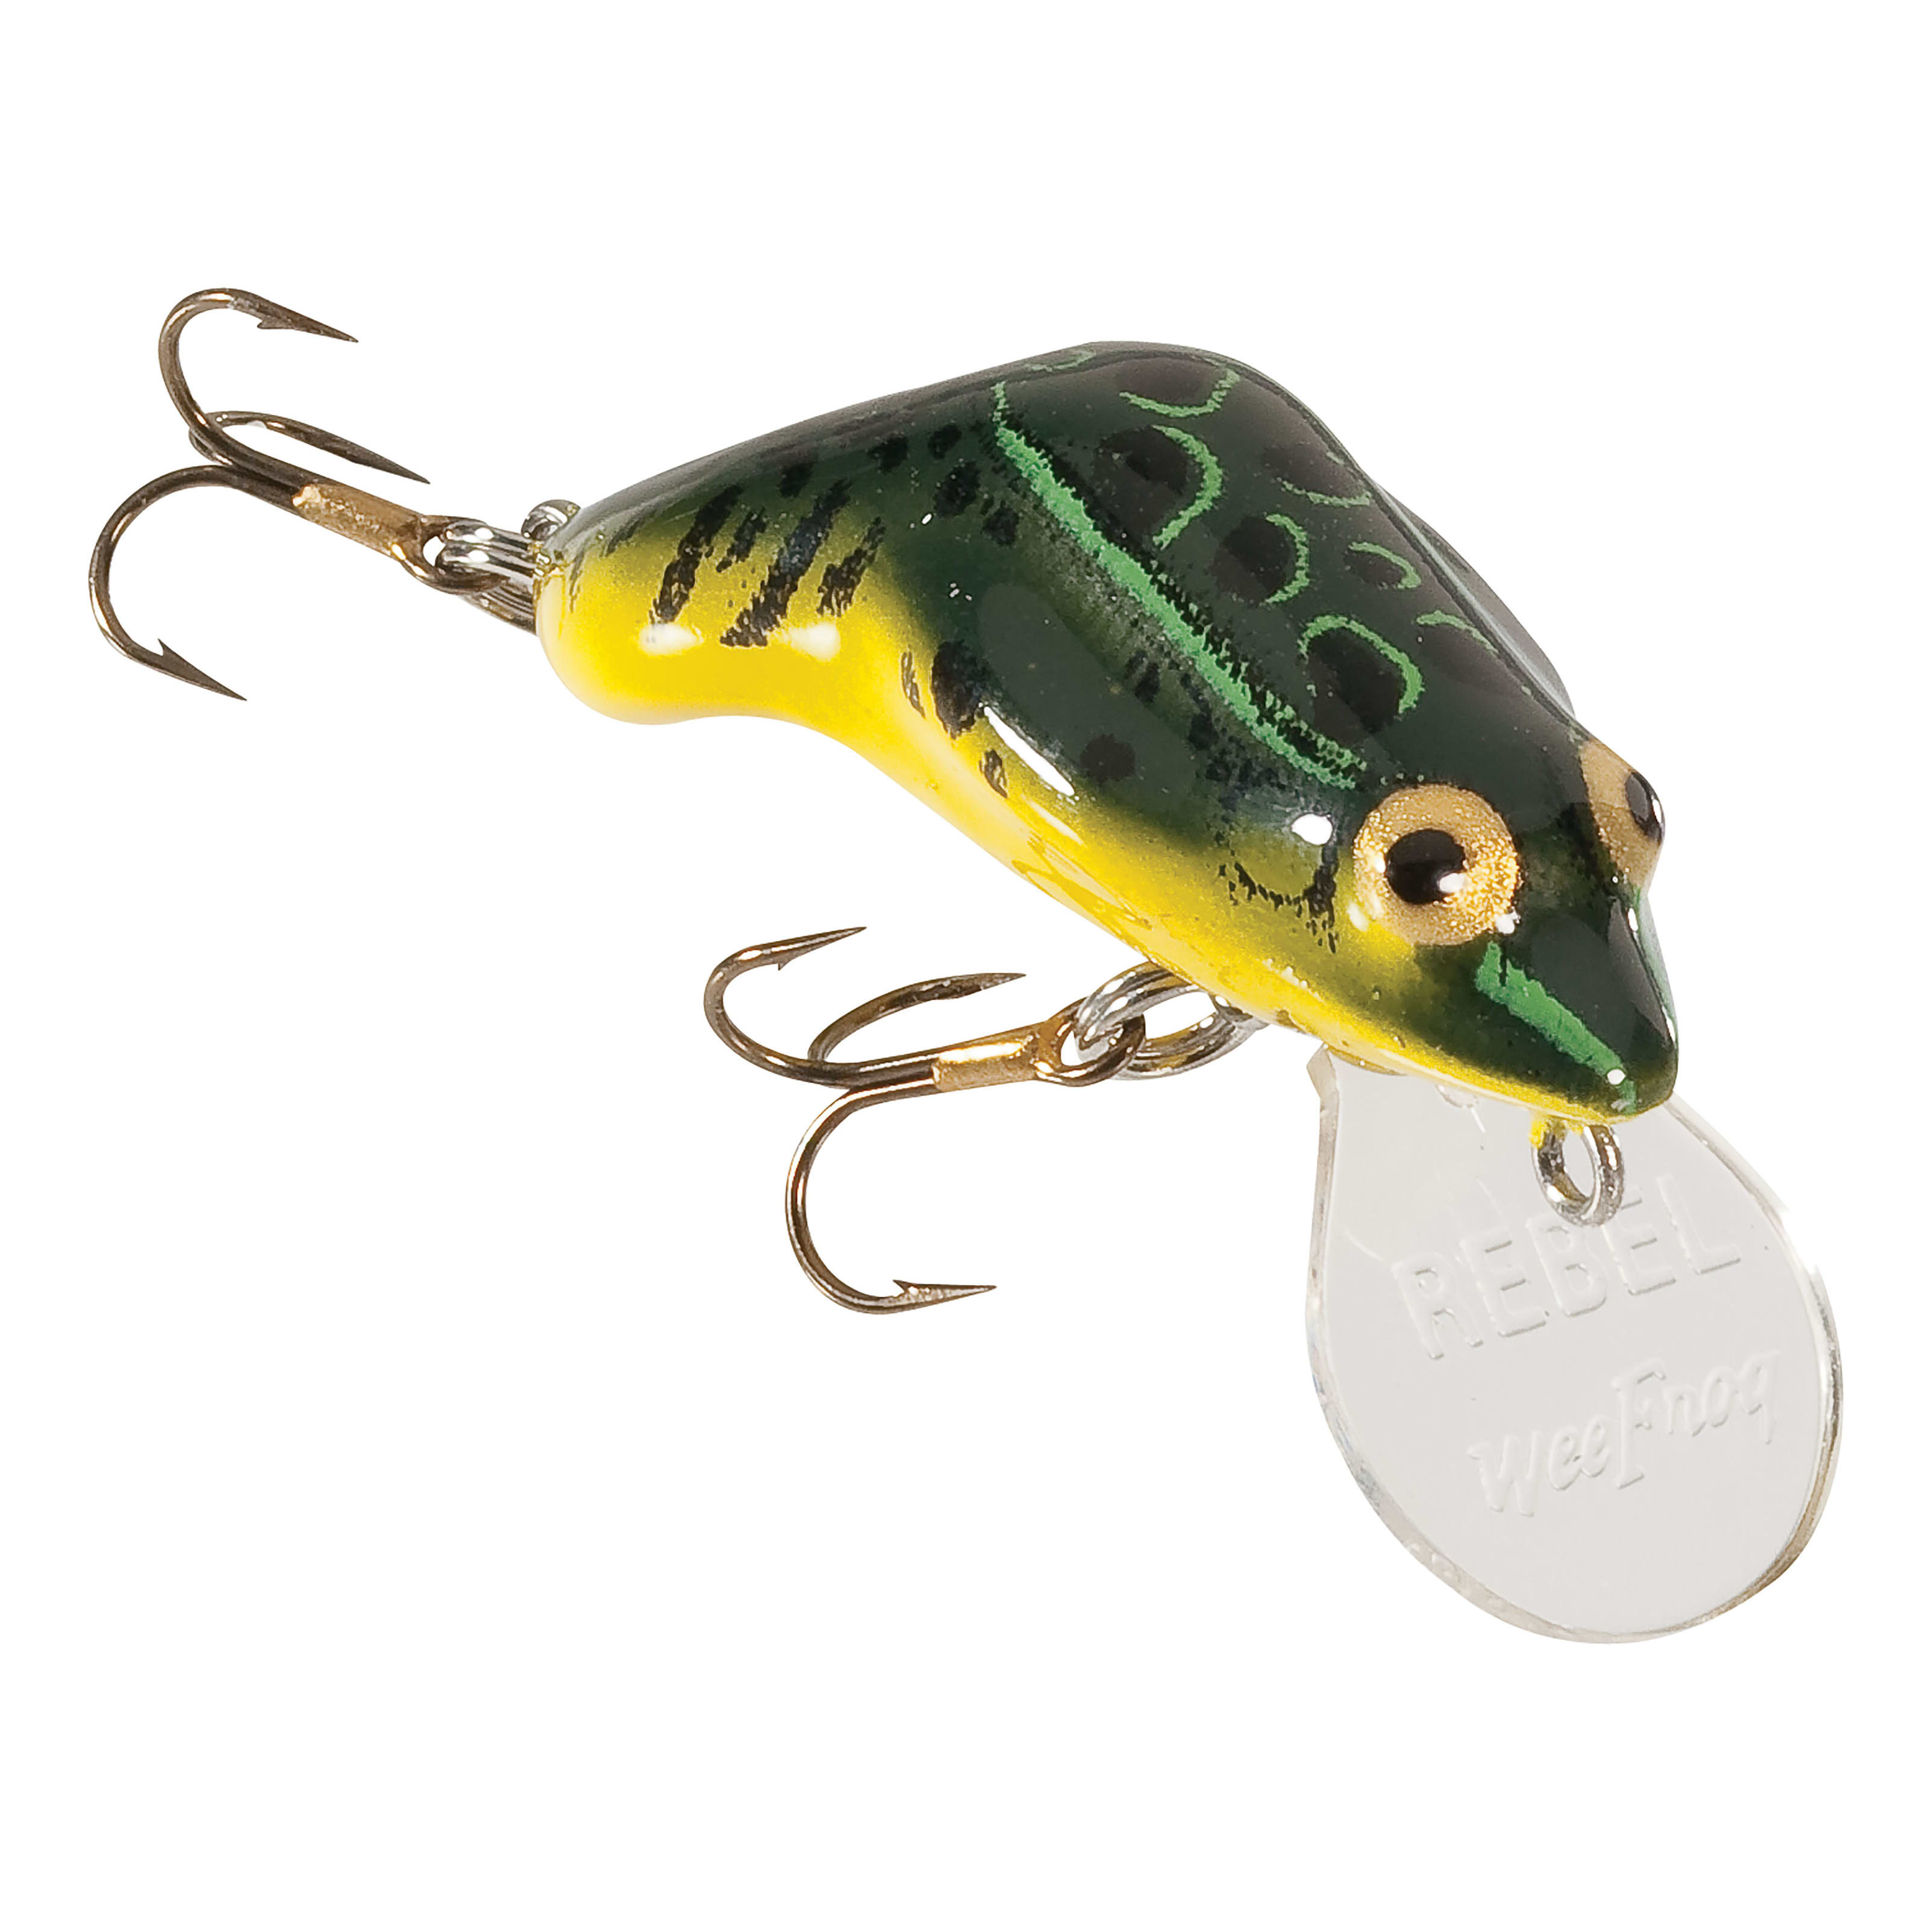 braveheart Frog Fishing Lures Hooks Artificial Fishing Lures Baits Hard Bait  Fishing Lures 